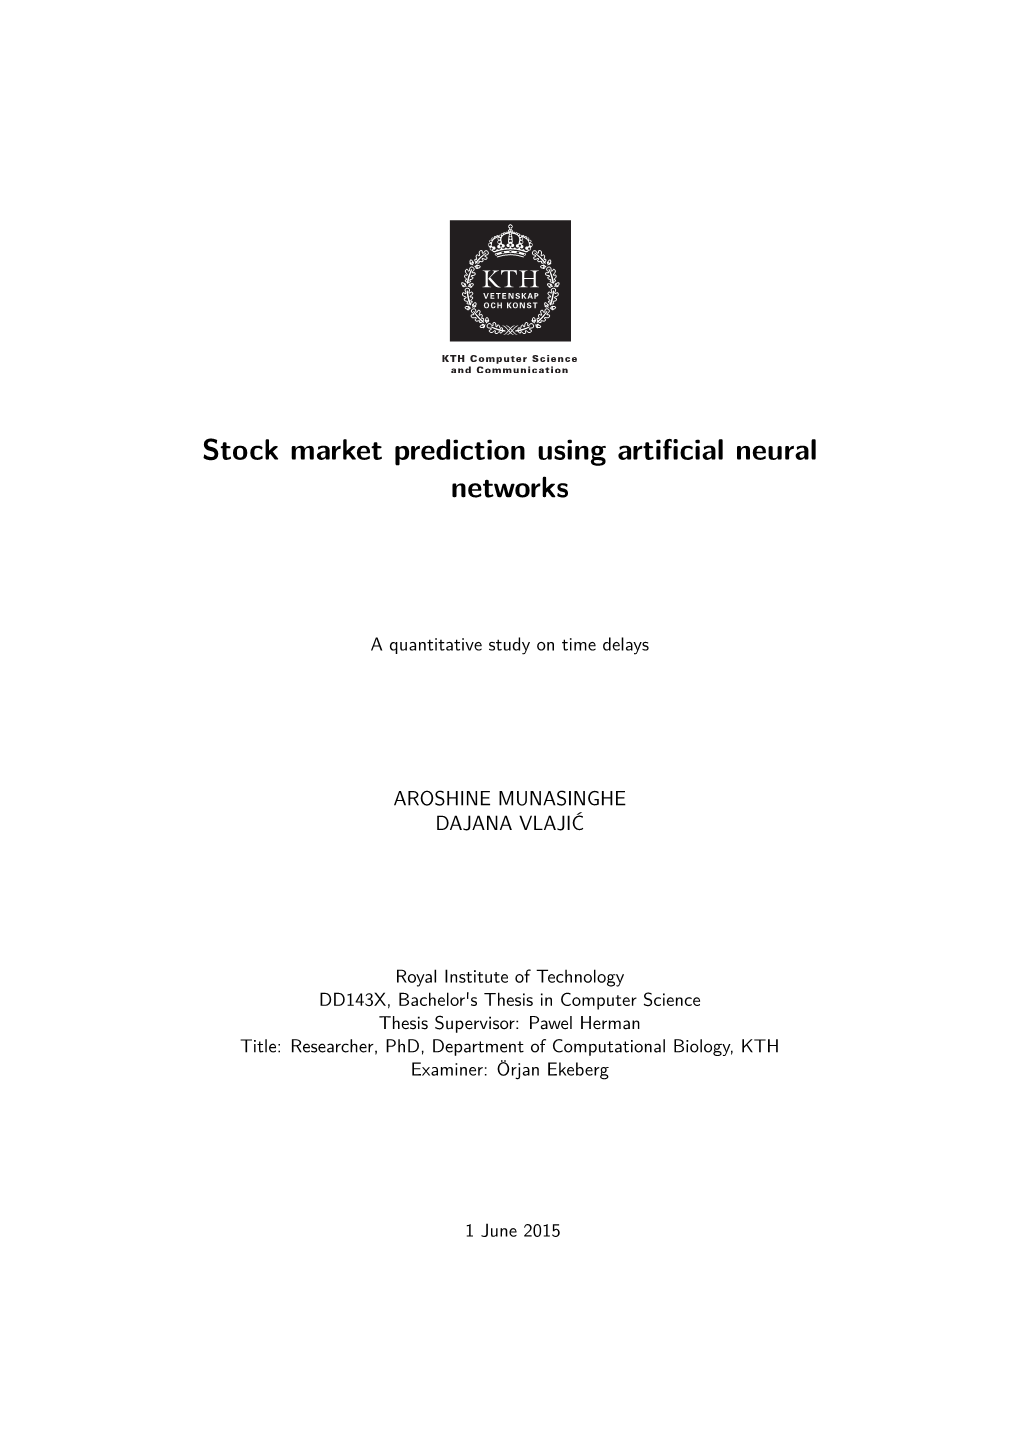 Stock Market Prediction Using Artificial Neural Networks